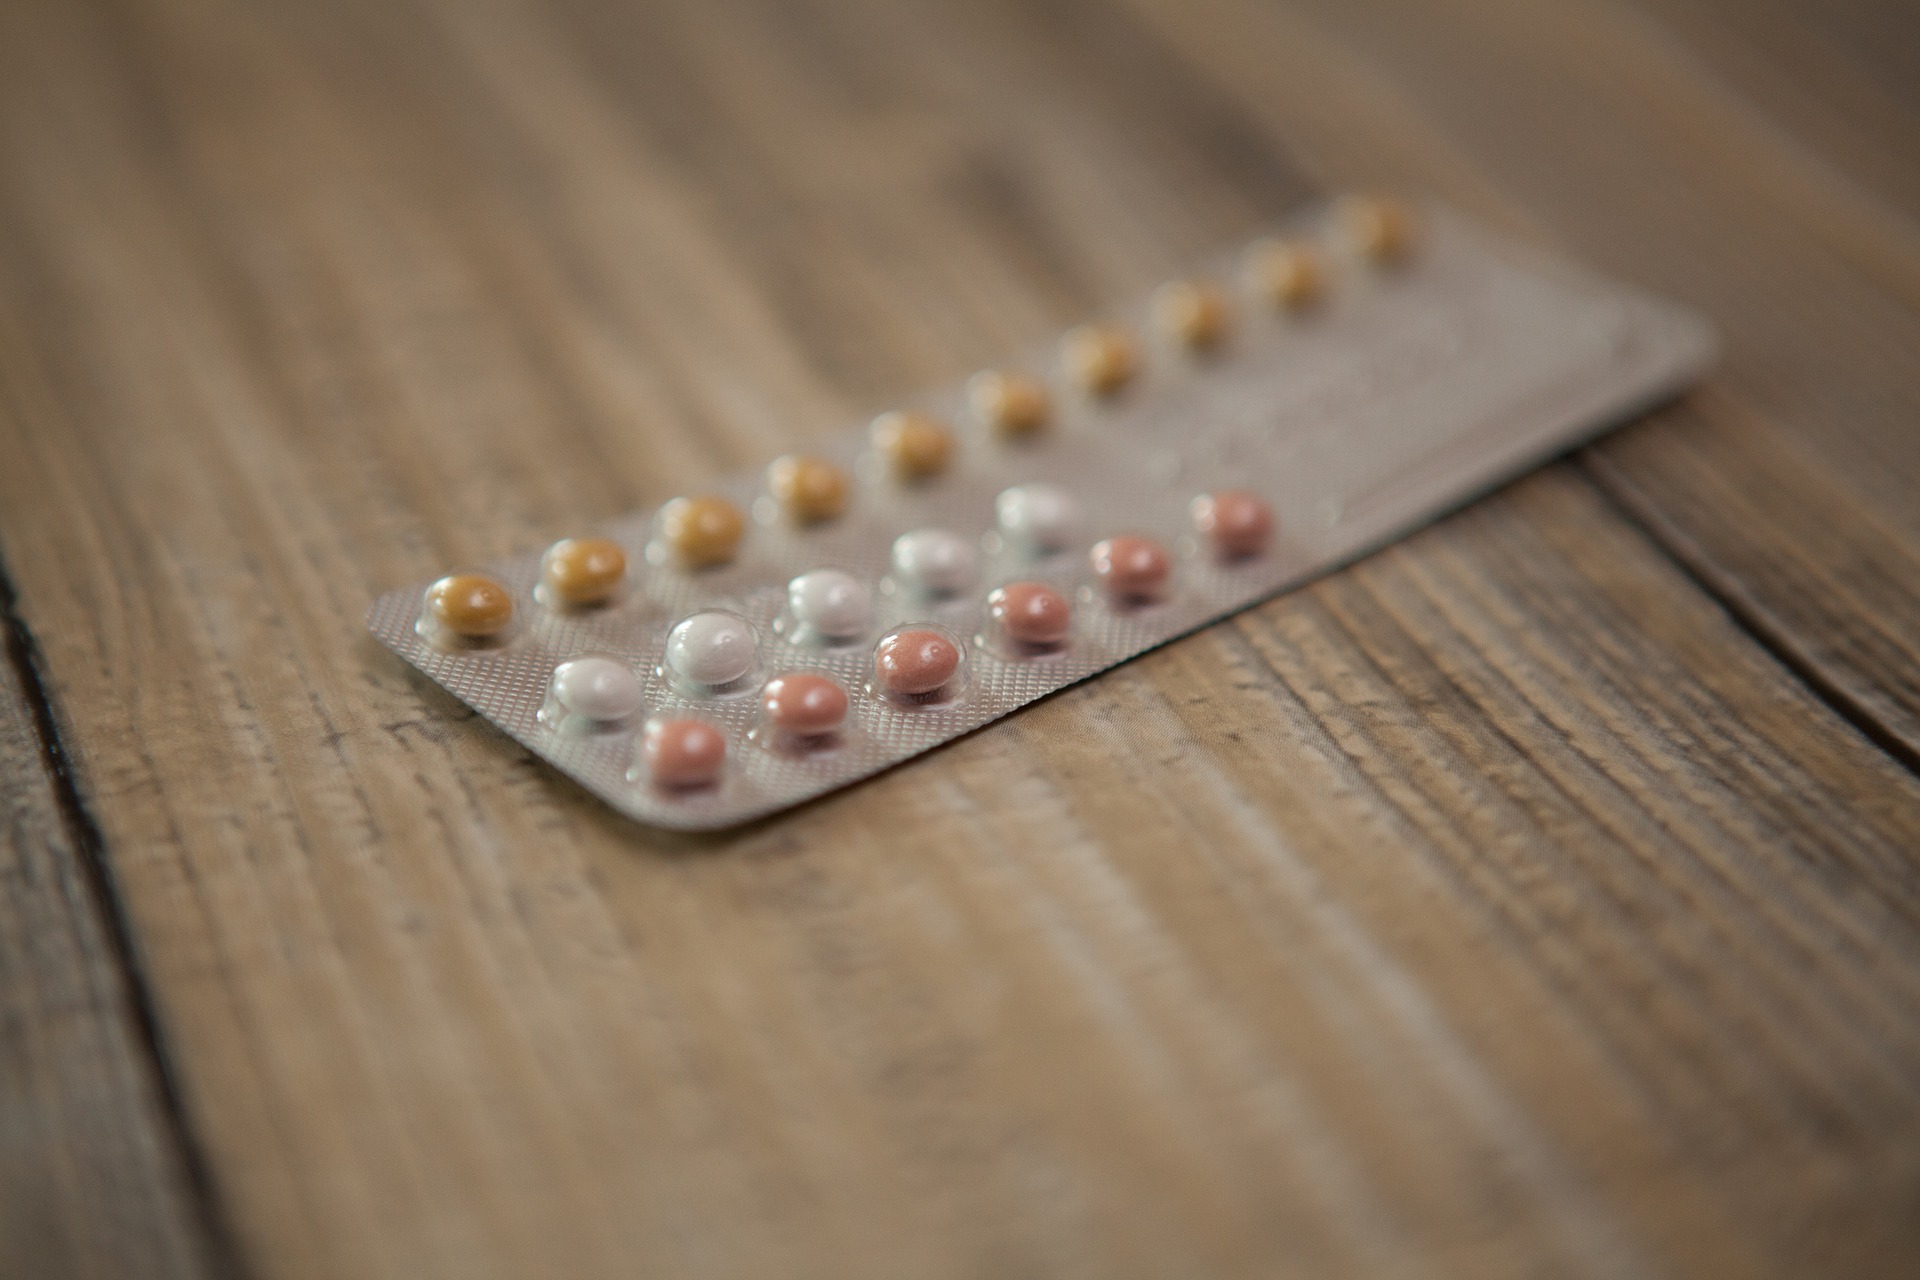 What you should know about birth control and breast cancer